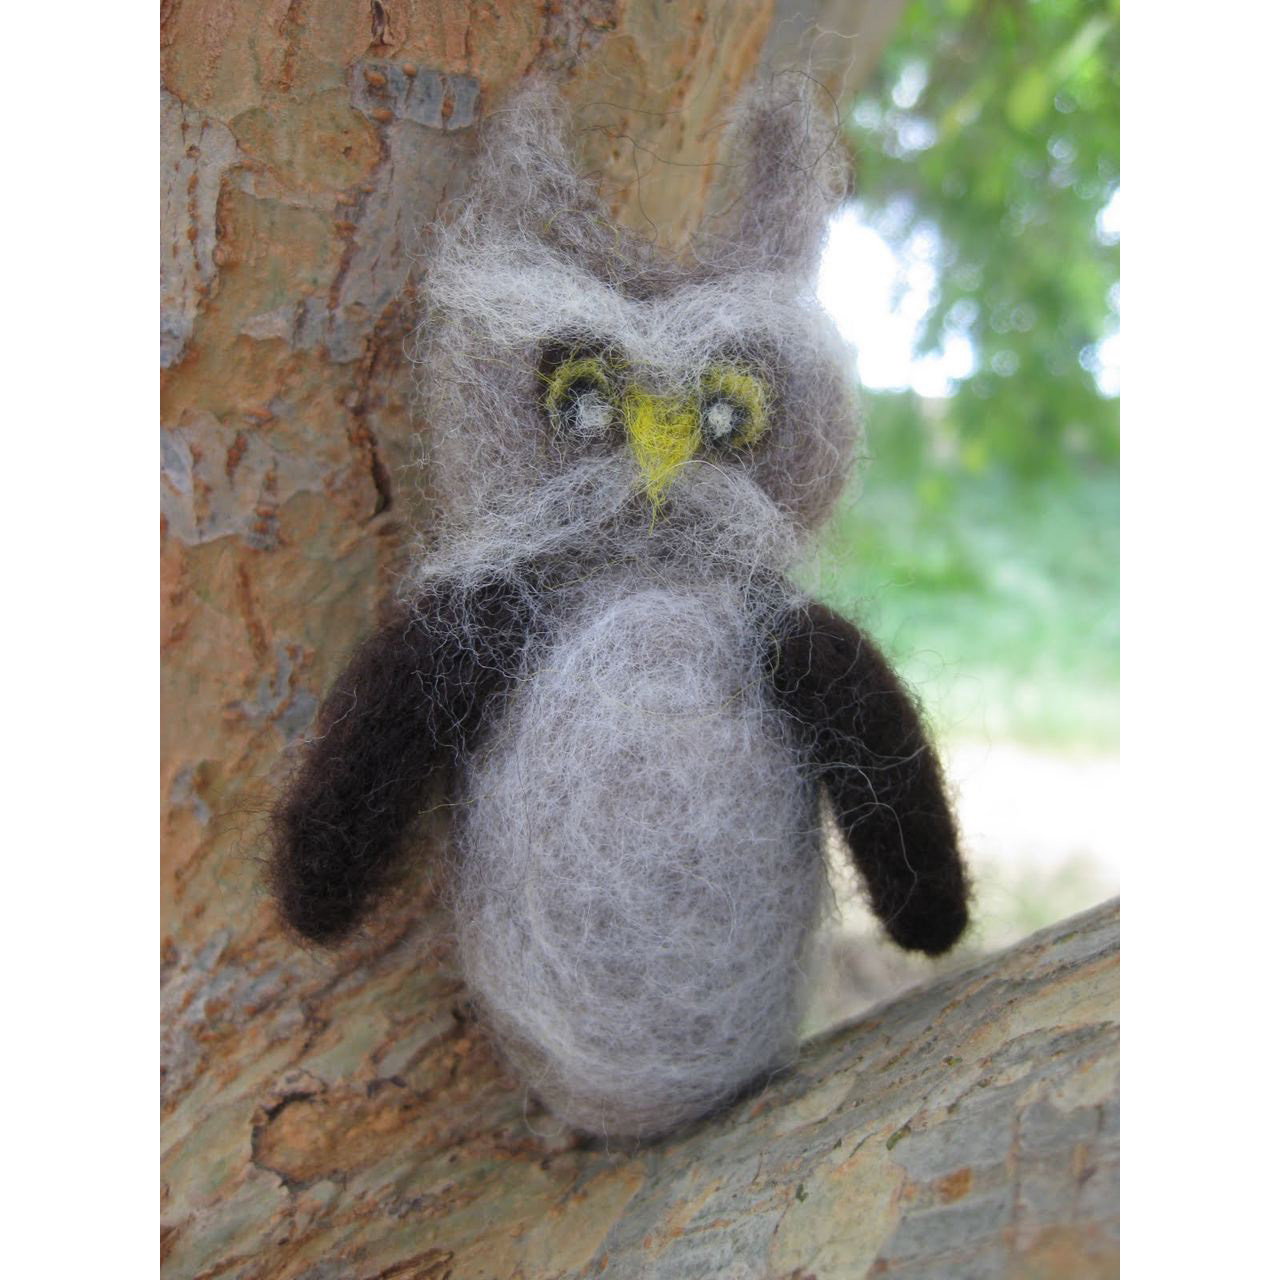 Mr Owl in his tree.